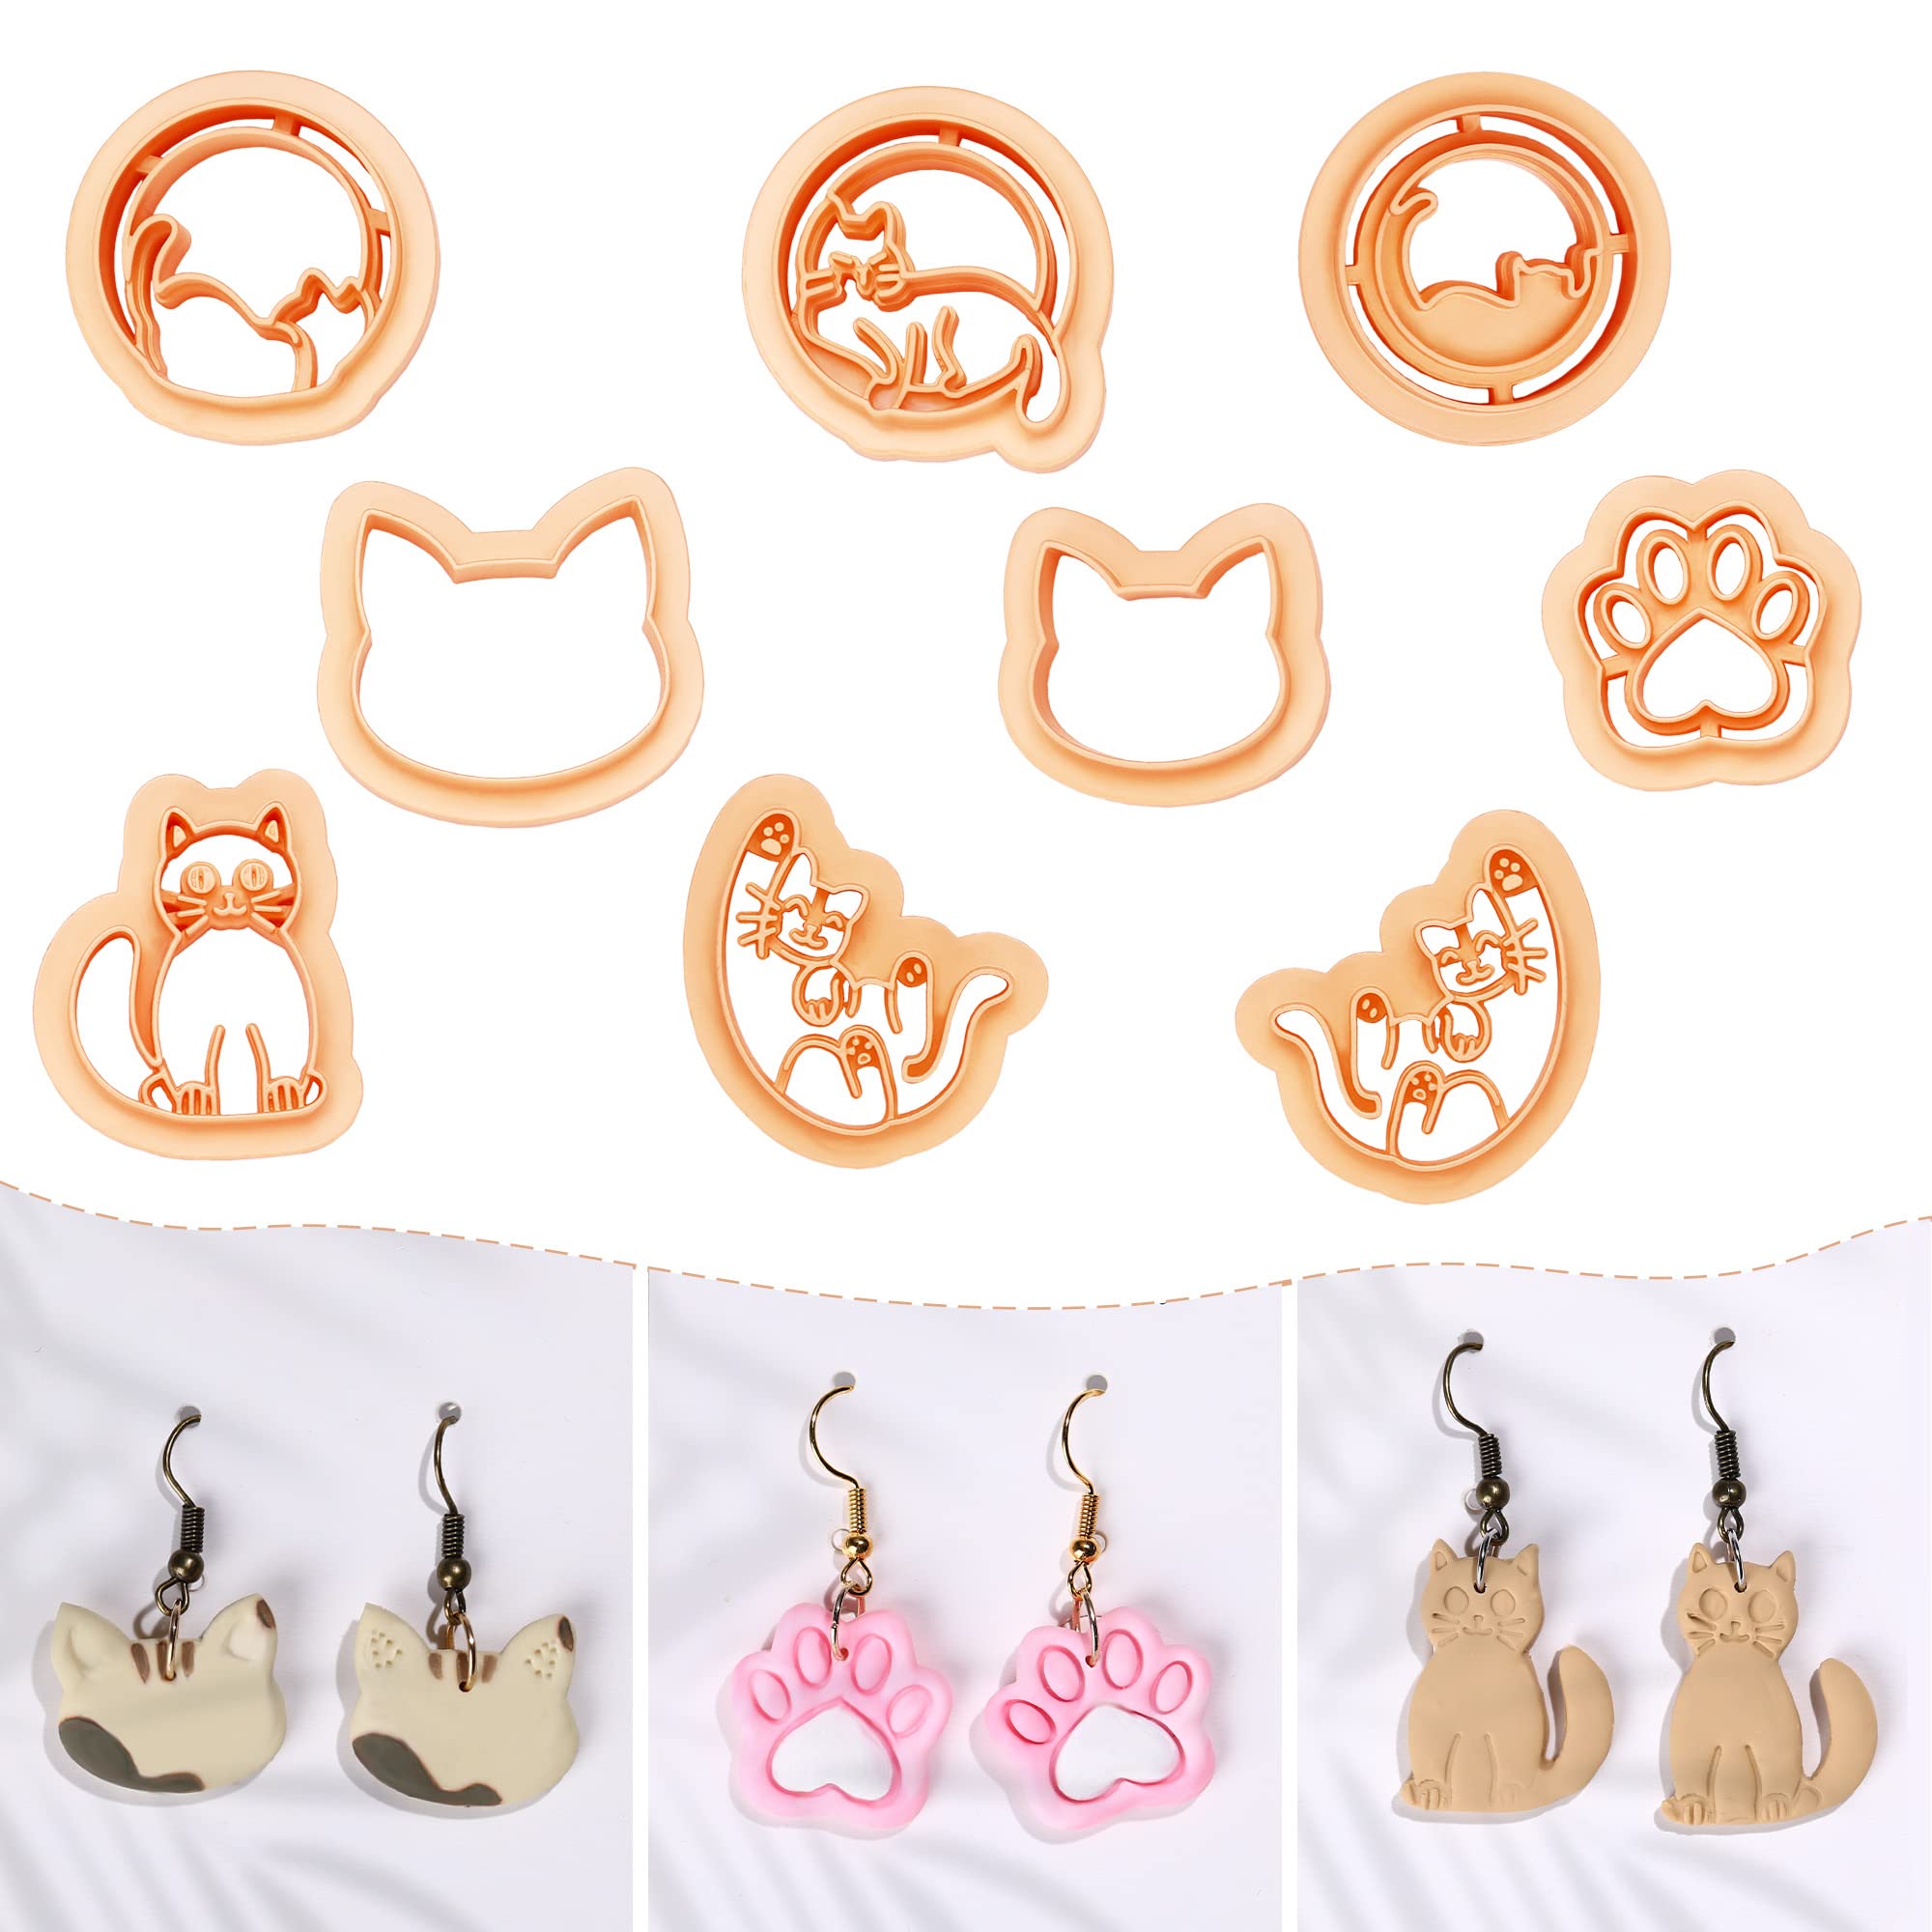 Puocaon Cat Polymer Clay Cutters 9 Shapes